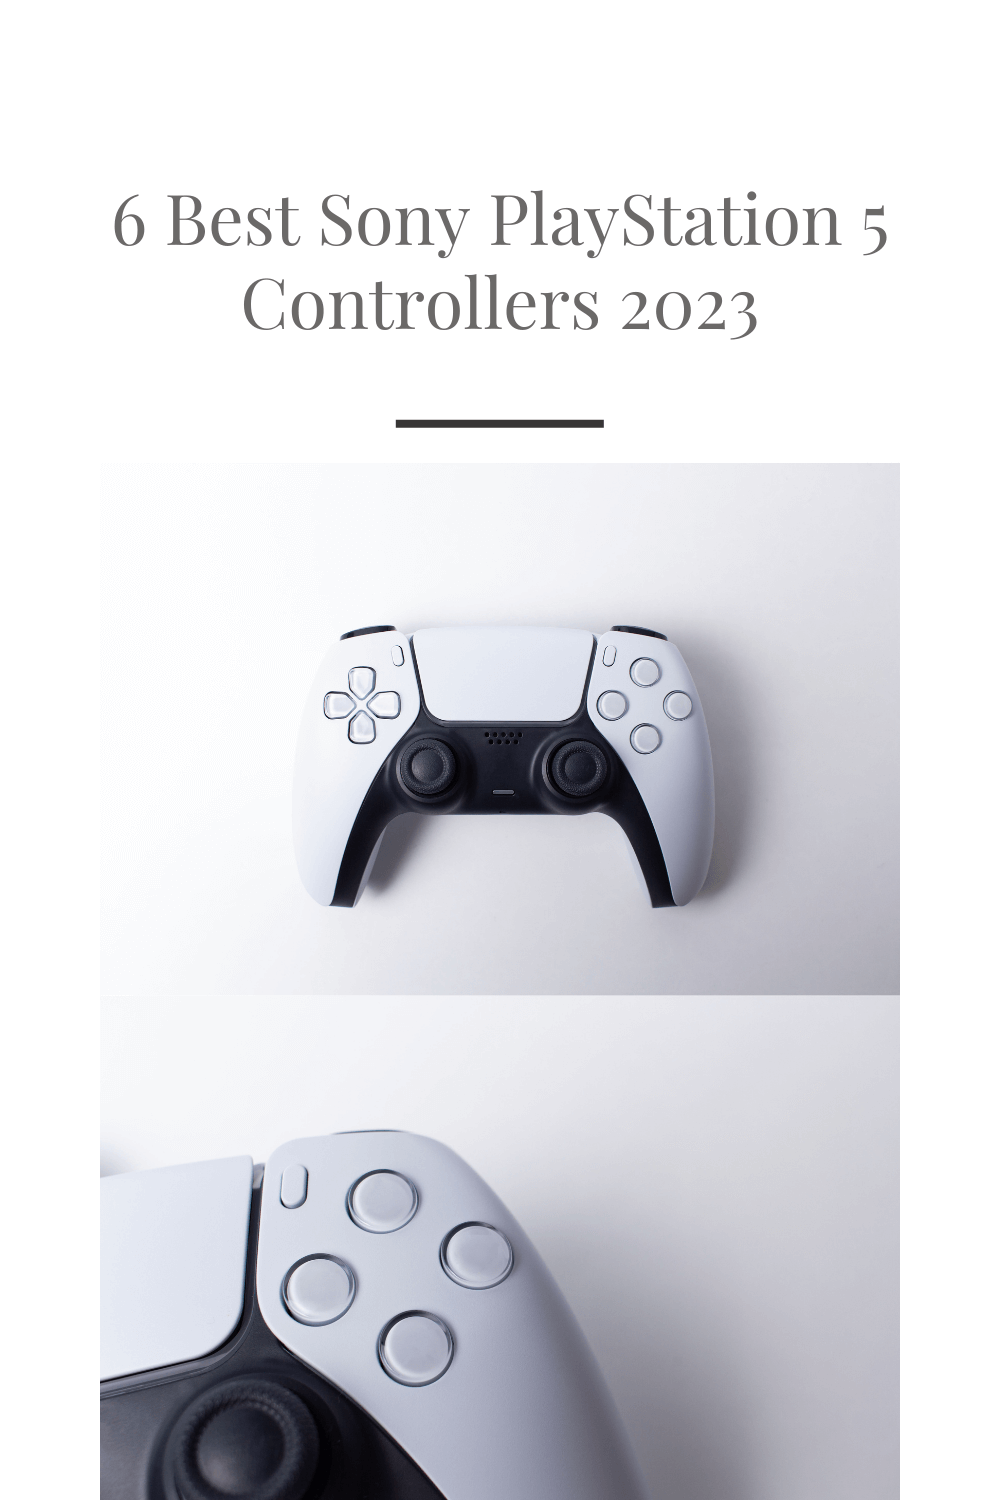 6 Best Sony PlayStation 5 Controllers 2023